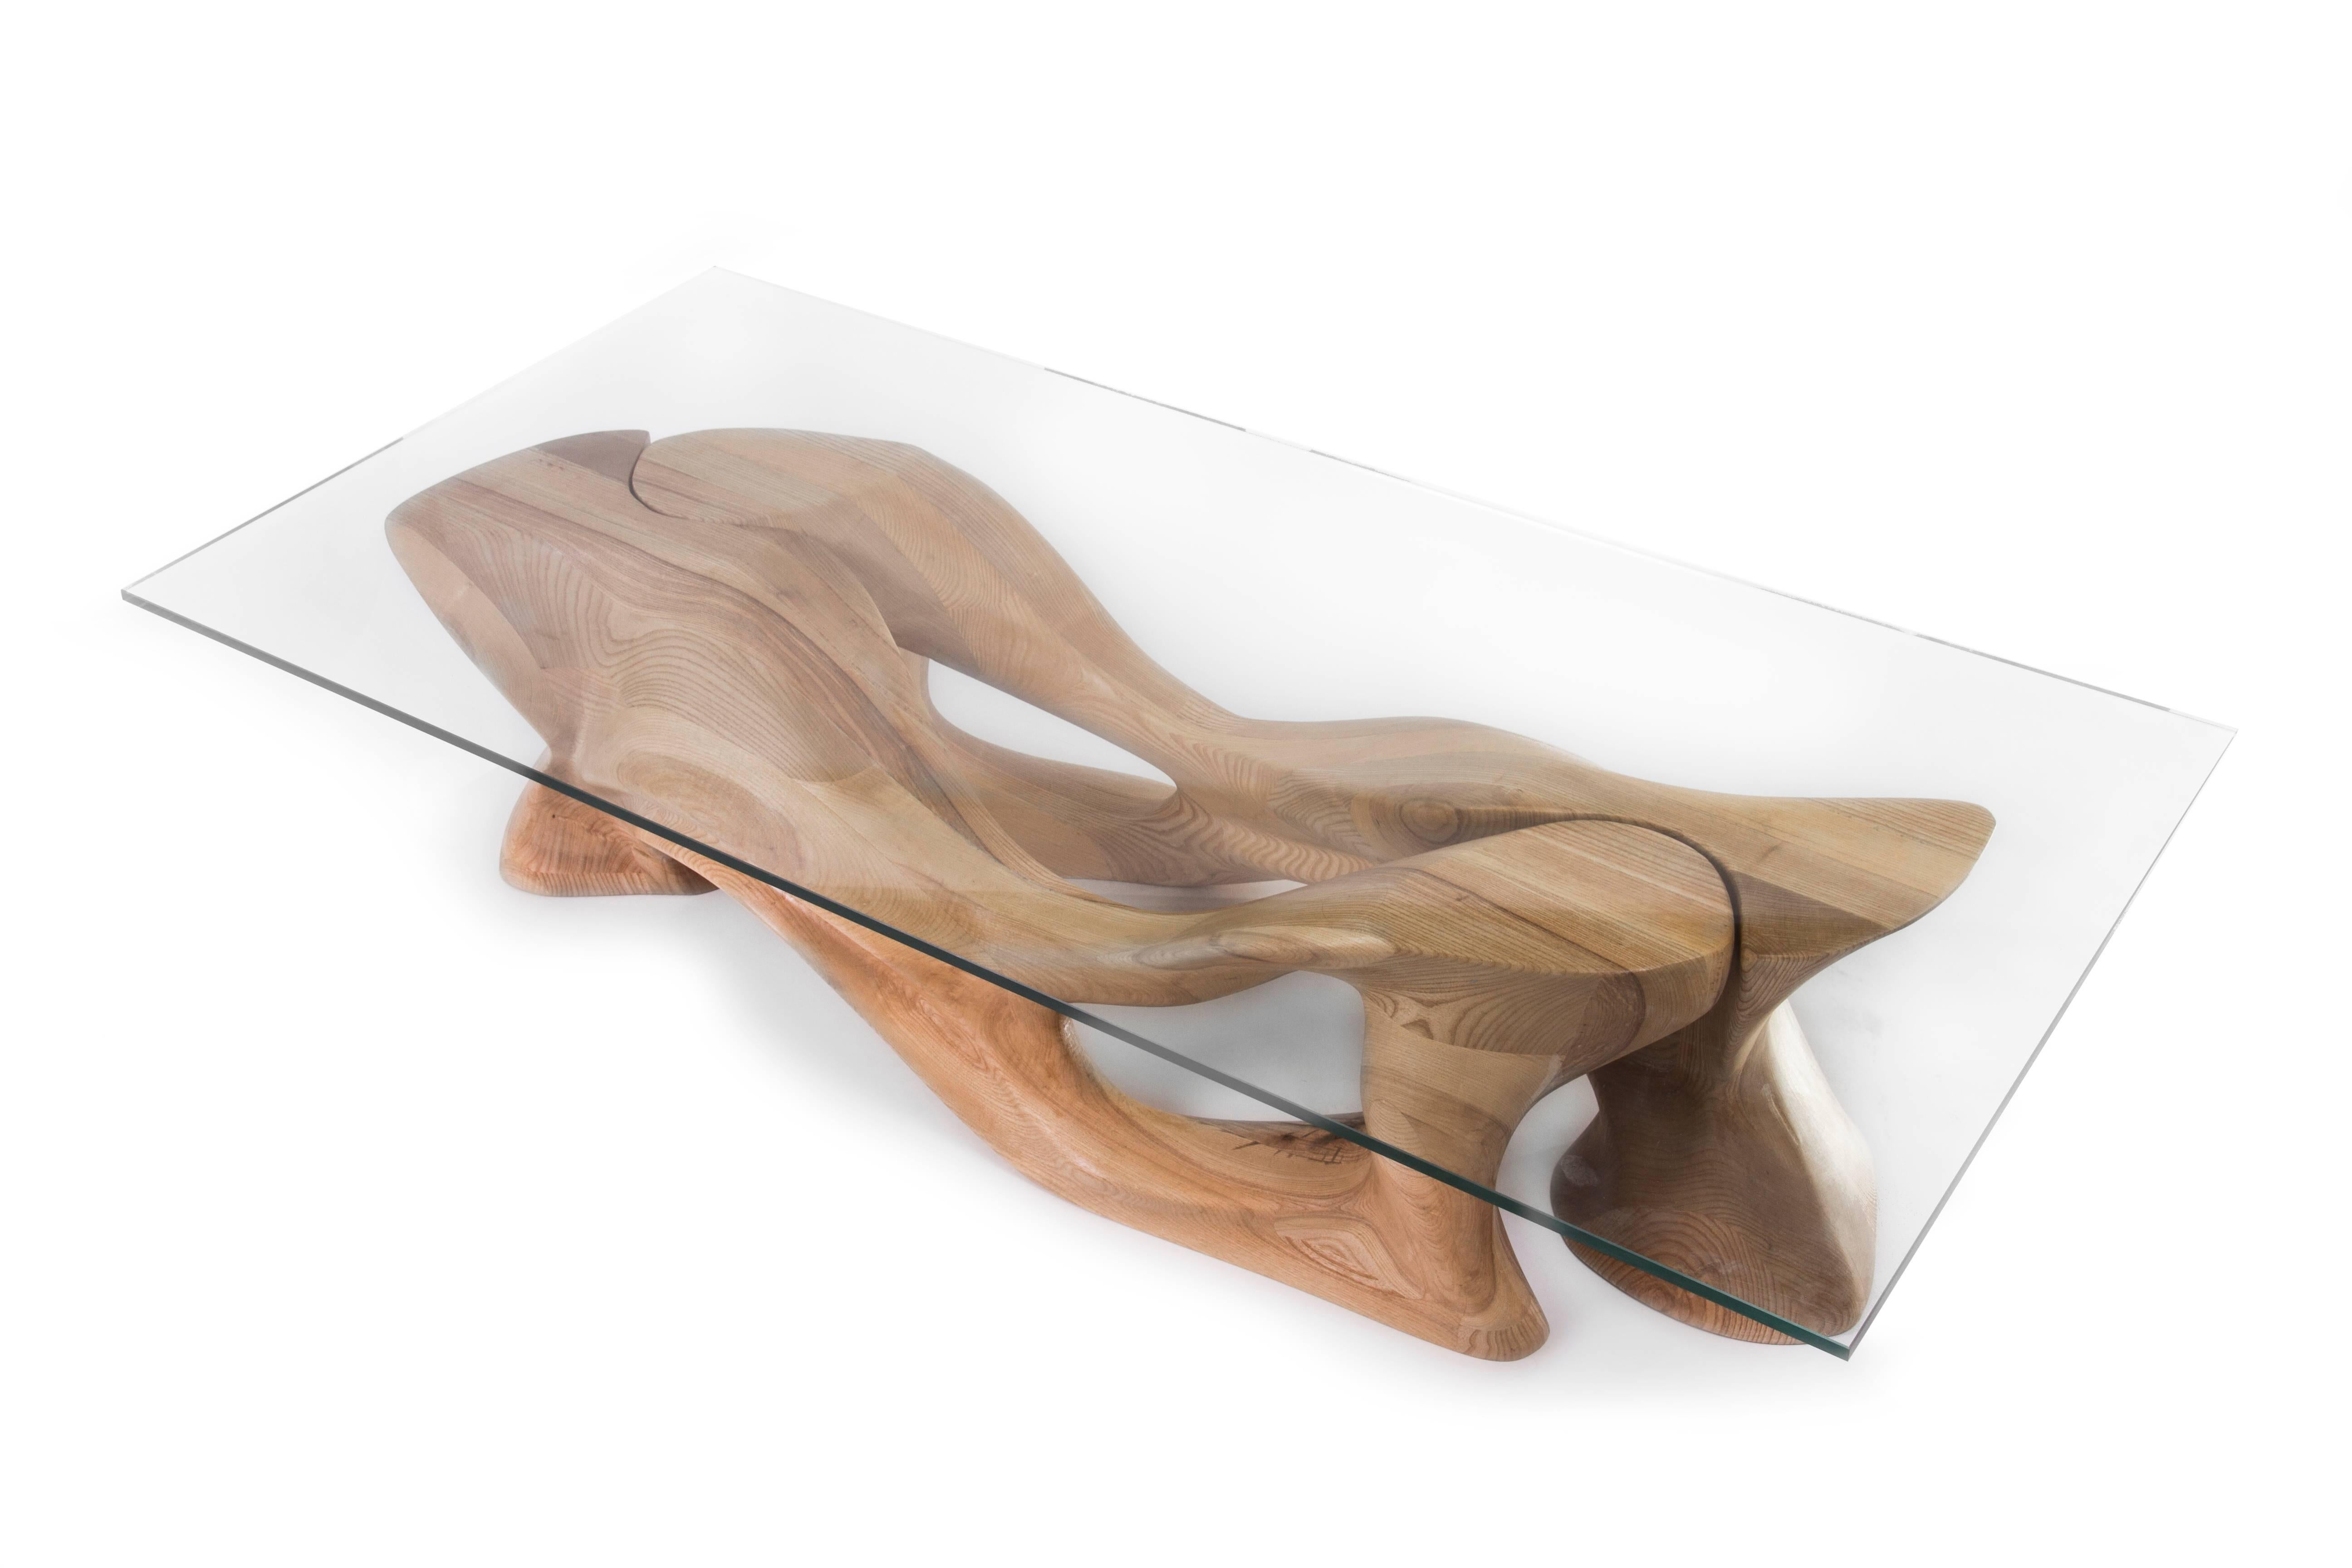 Crux coffee table is a stylish futuristic sculptural art table with a dynamic form designed and manufactured by Amorph. Crux Table consists of two identical pieces that join together to create elegant shape. The dimension of base is 52.25